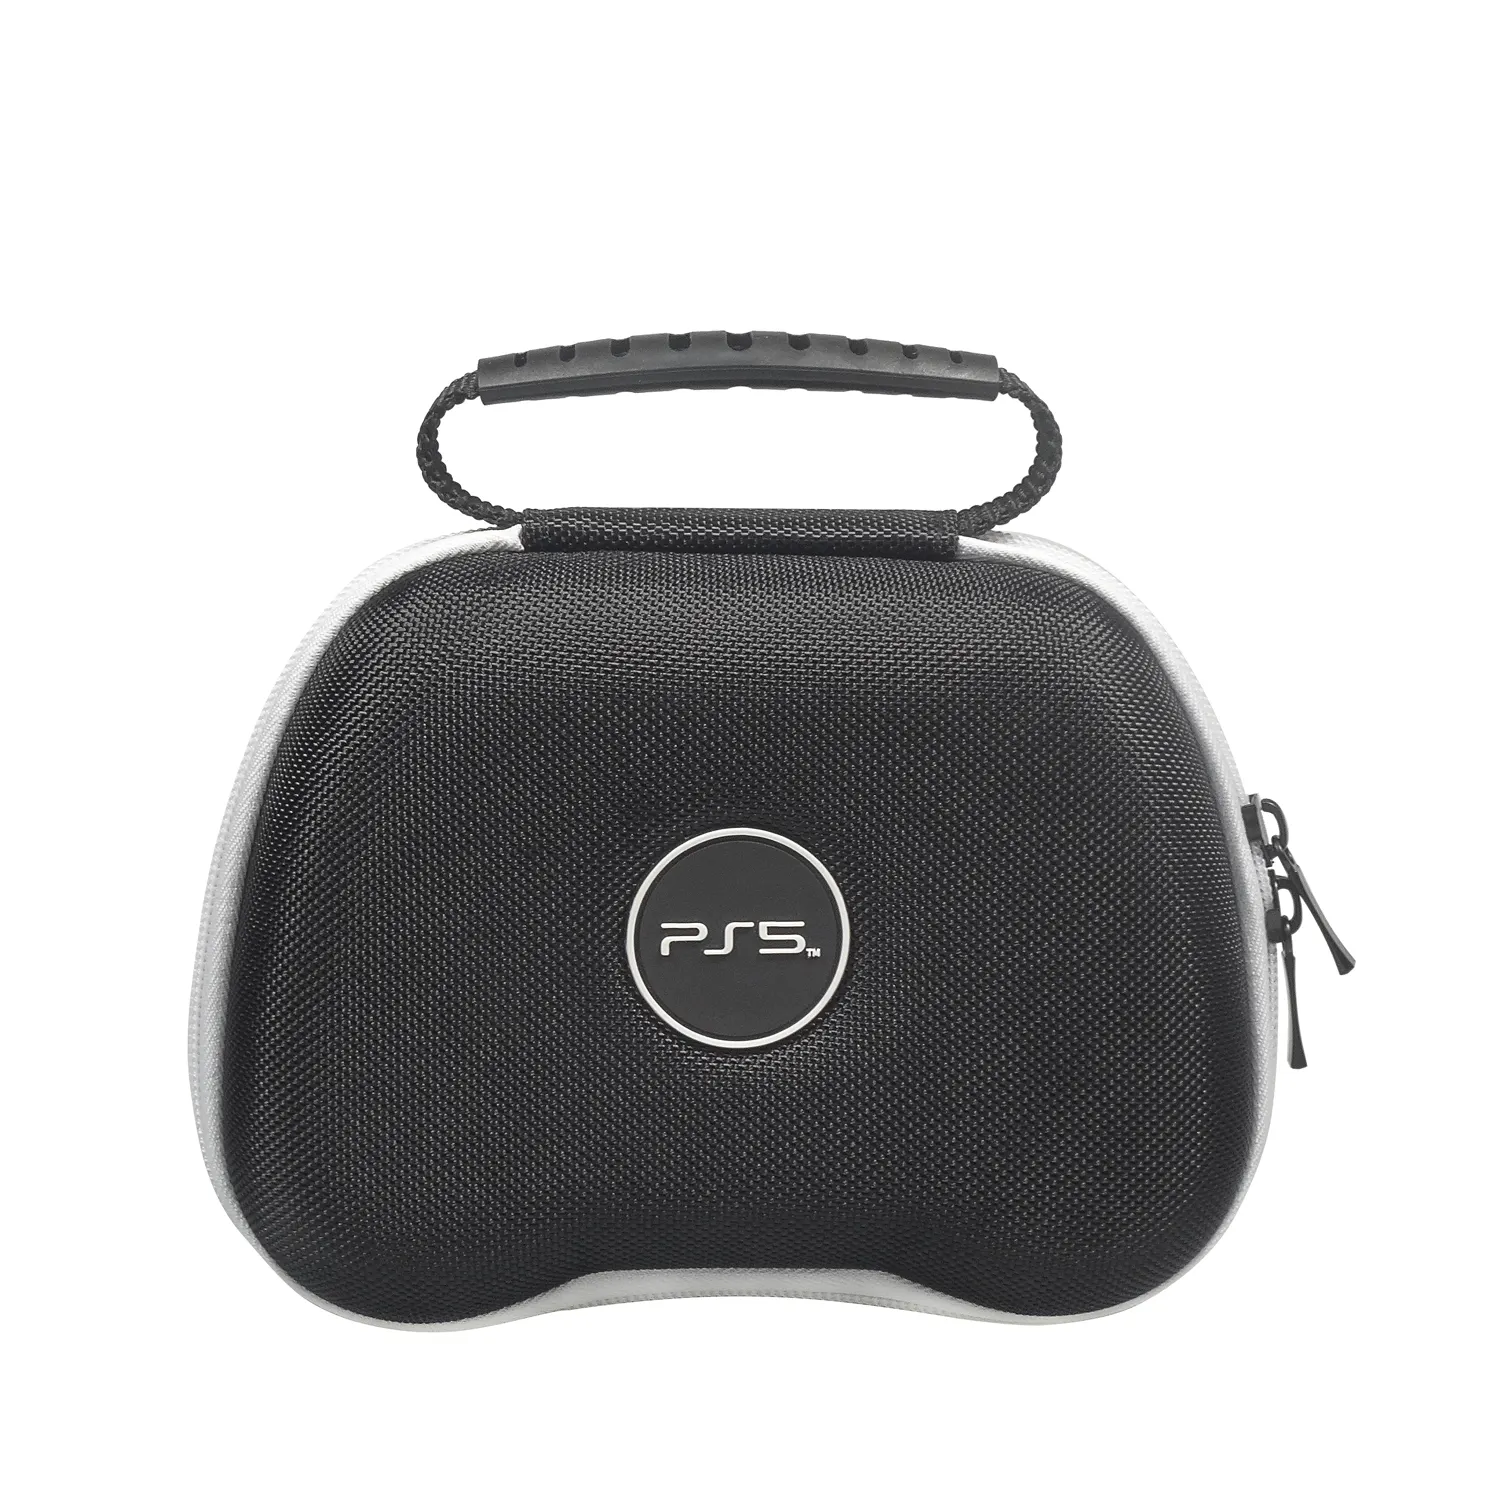 For Playstation Gamepad Protective Case Carrying bag For Sony PS5 Controller Case Joypad hard case console disc version